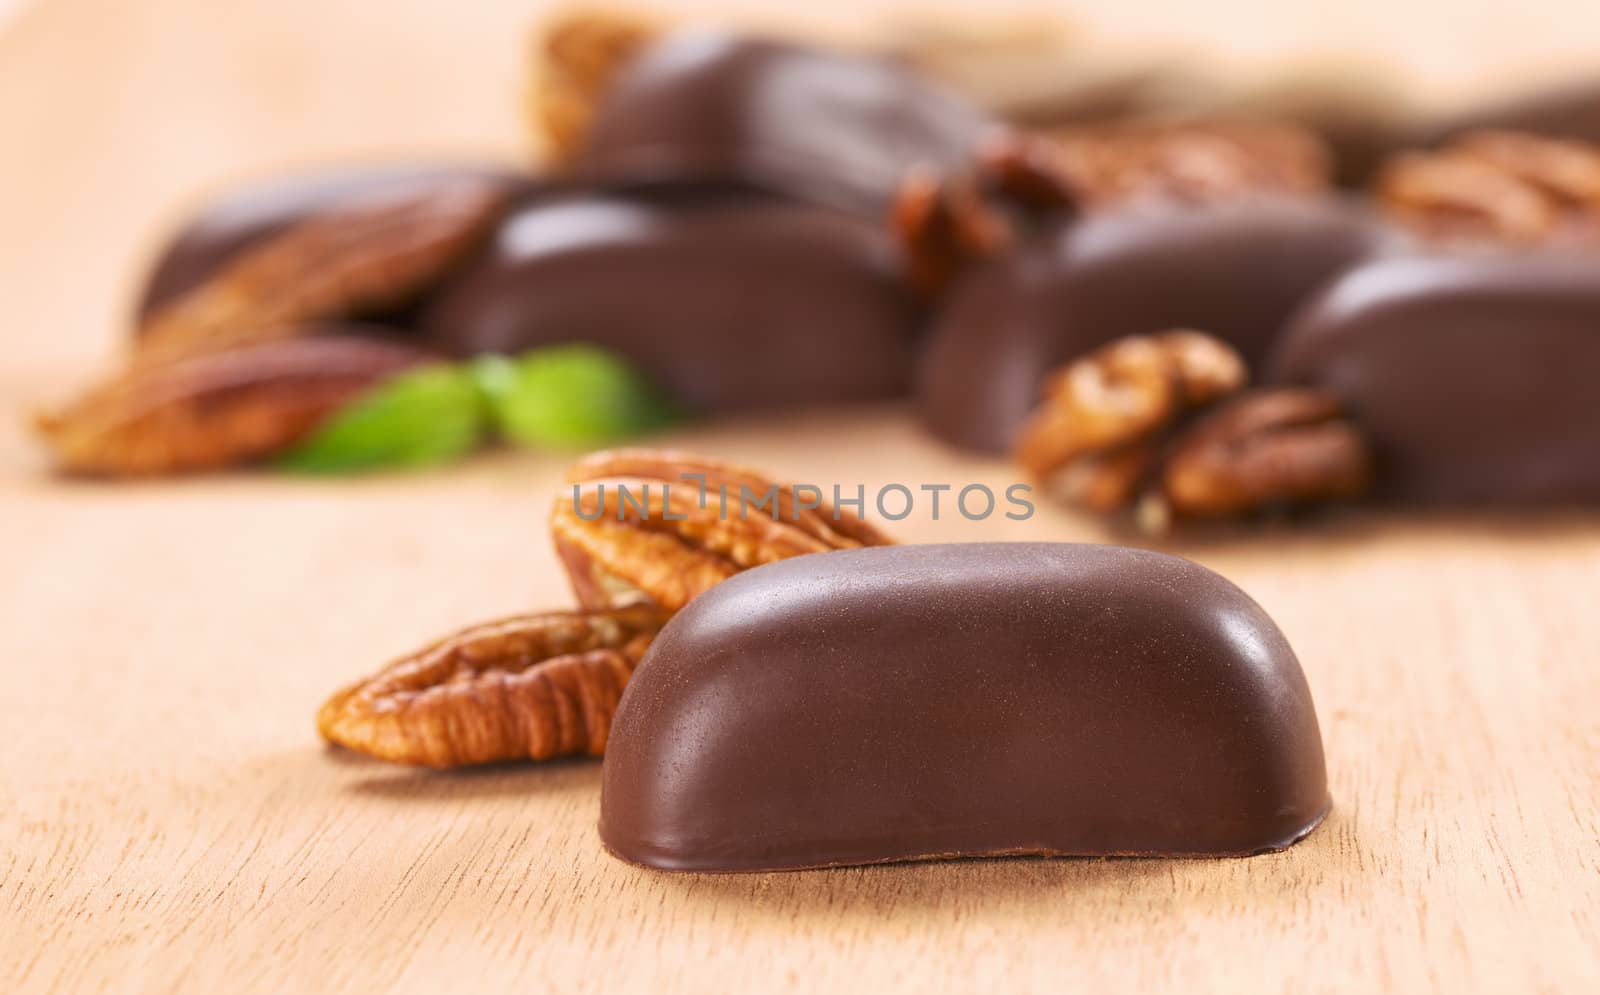 Chocolate candies filled with pecan nut (Very Shallow Depth of Field, Focus on the front of the candy)